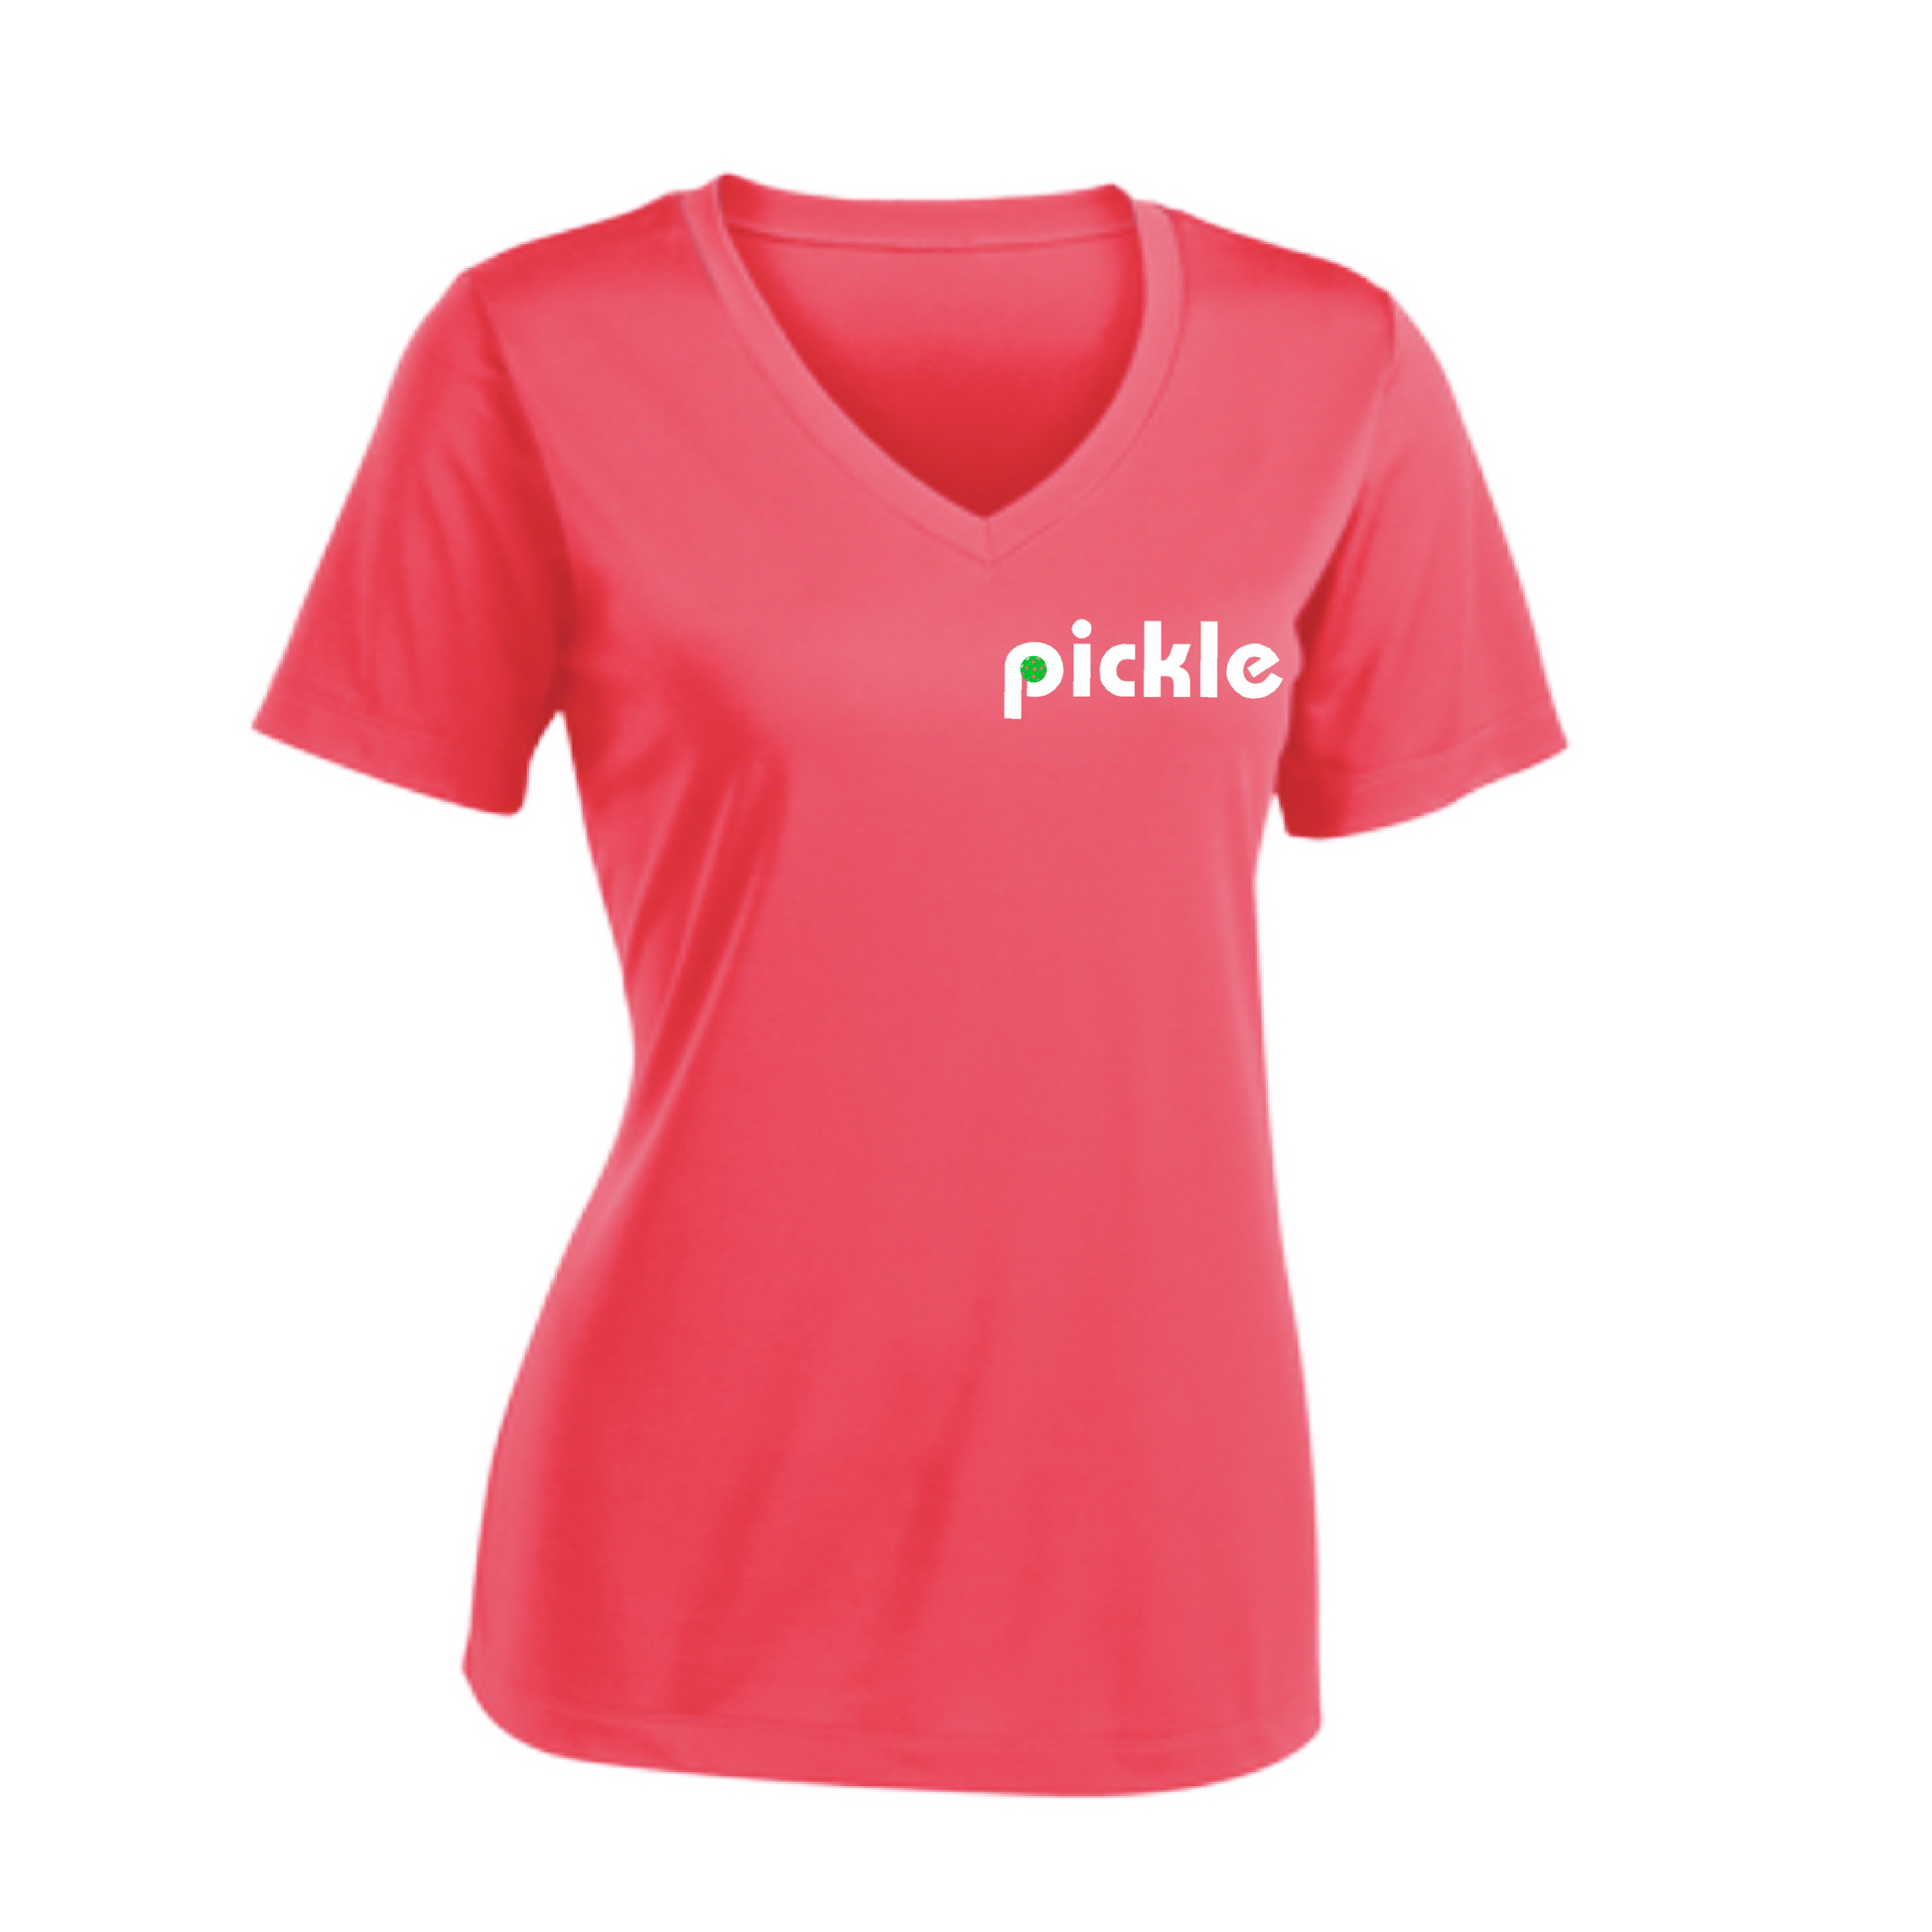 Fashion meets function in this Women's pickleball shirt! Enjoy its ultra-soft fabric with moisture-wicking properties and tri-blend softness. Keep your style looking bright with PosiCharge technology, which locks in color. Experience lightweight comfort and breathability. What are you waiting for?